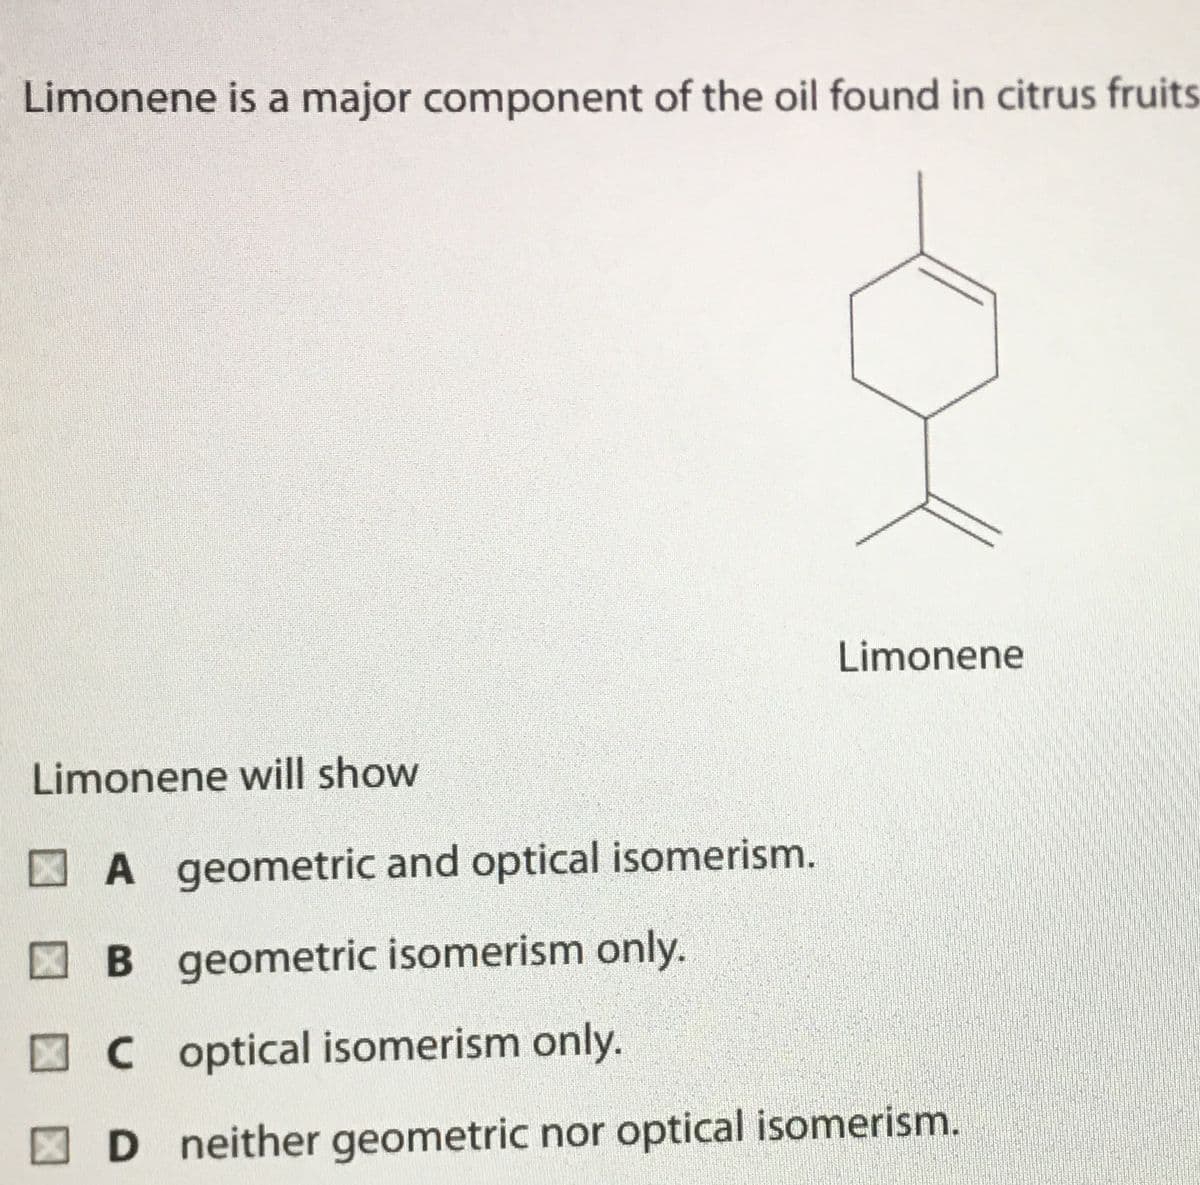 Limonene is a major component of the oil found in citrus fruits
Limonene
Limonene will show
A geometric and optical isomerism.
B geometric isomerism only.
C optical isomerism only.
D neither geometric nor optical isomerism.
